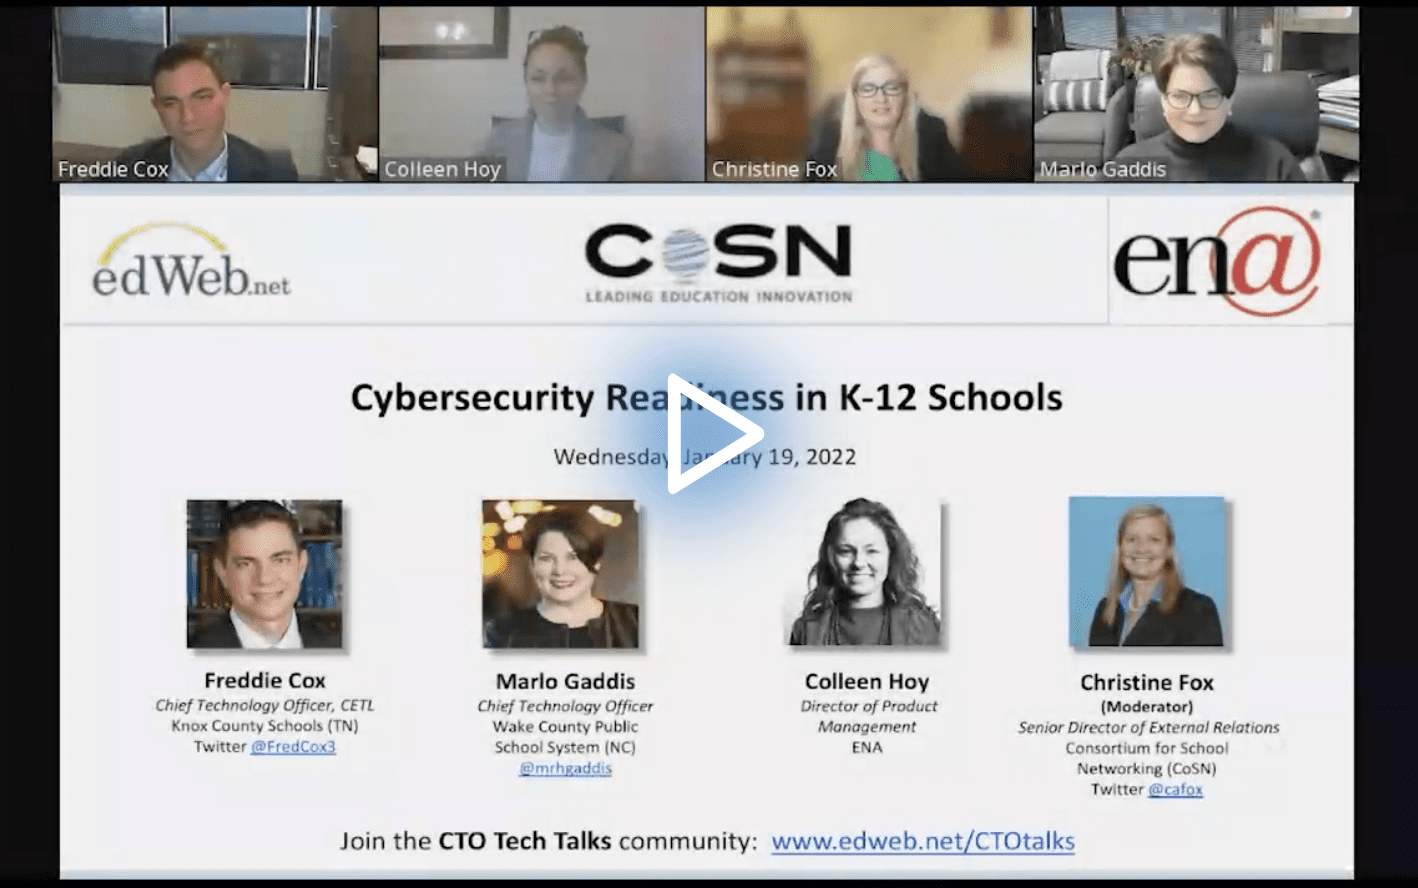 Cybersecurity Readiness in K-12 Schools edLeader Panel recording link